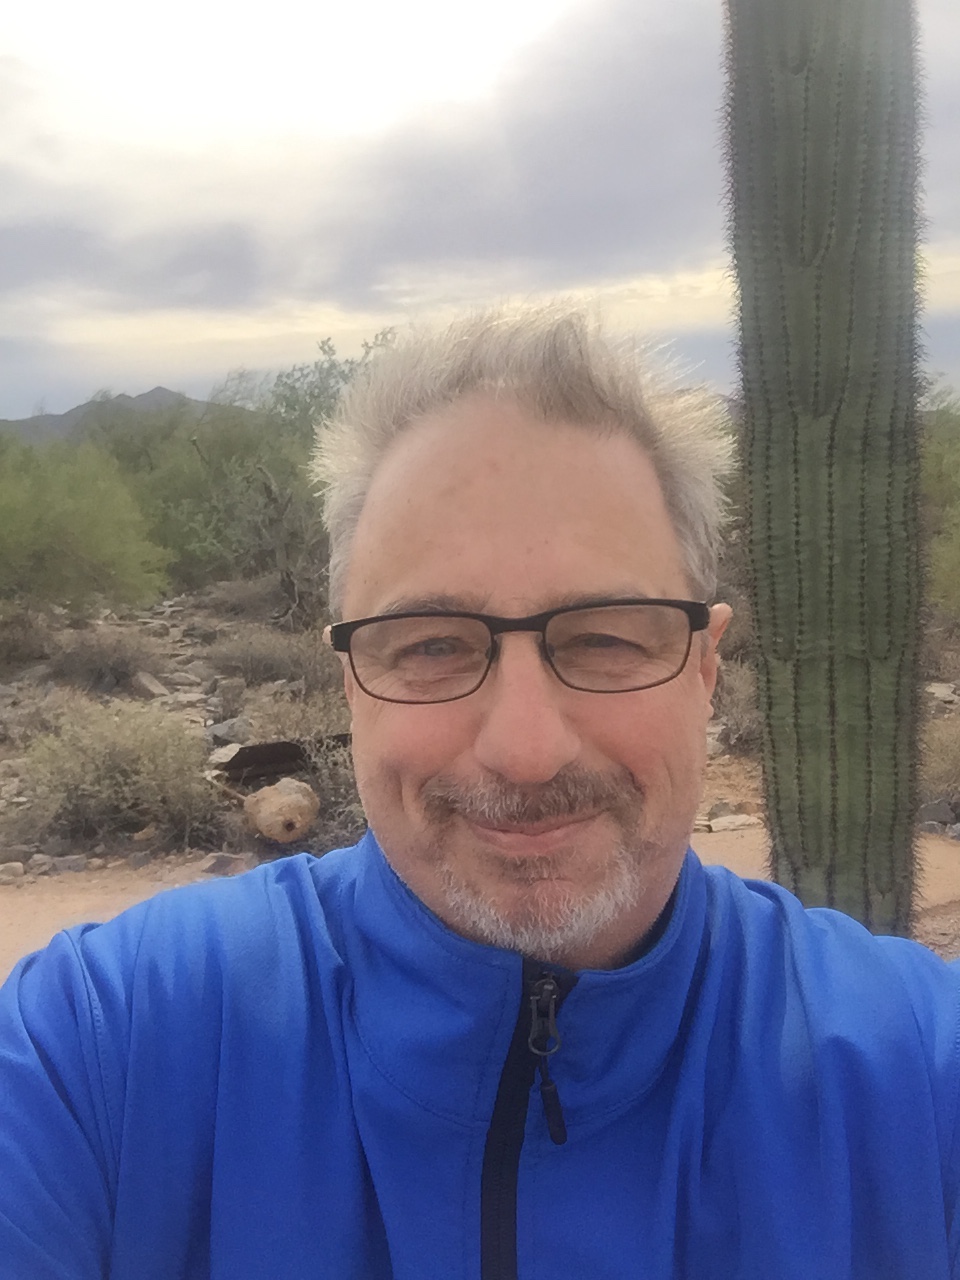 Carl Ribaudo, founder and president of SMG Consulting, announced his appointment to the Nevada Commission on Tourism’s Marketing Committee.